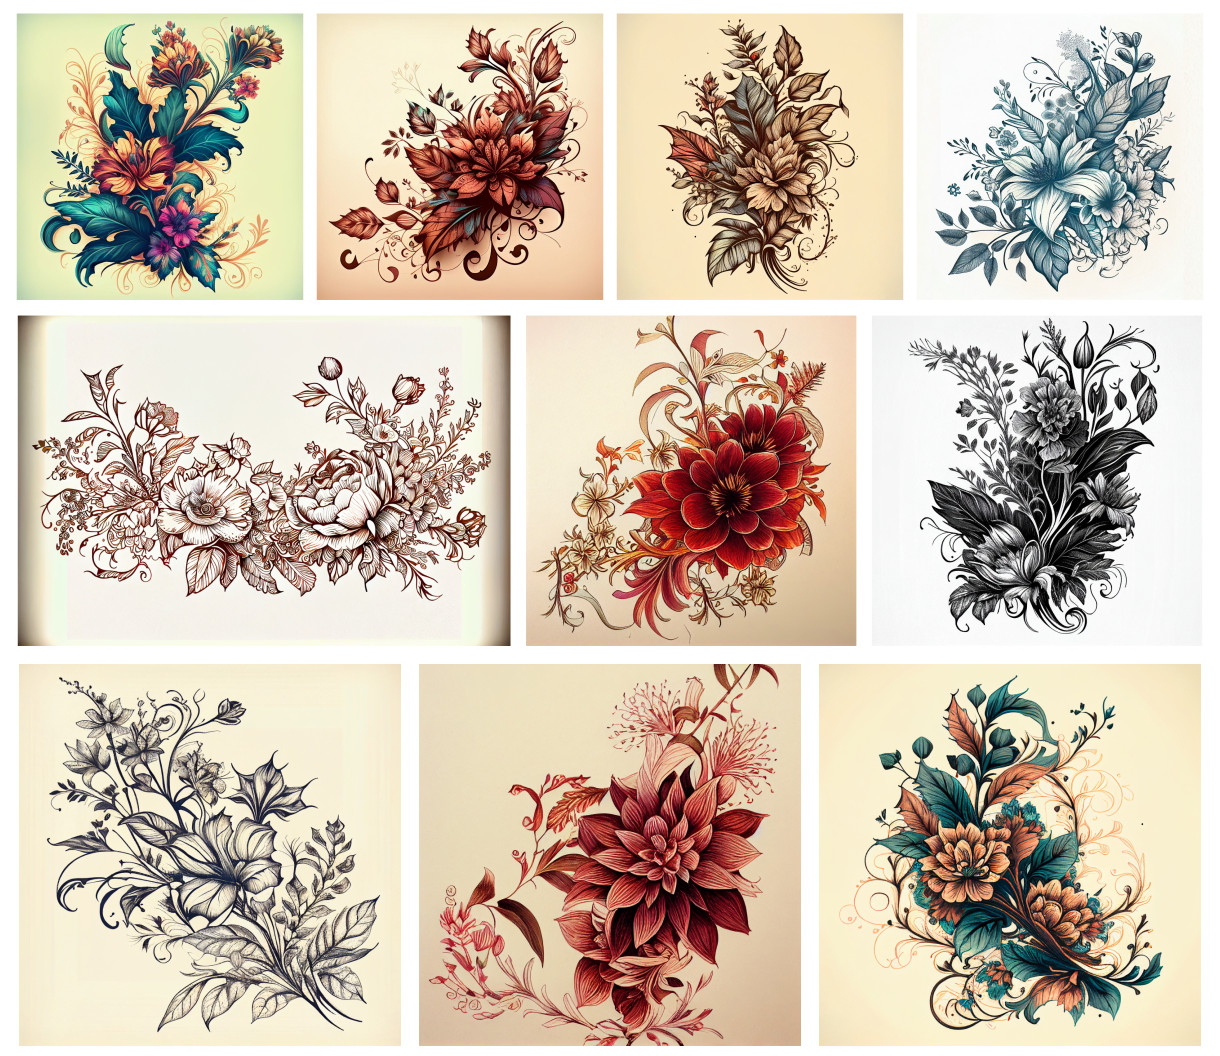 Nature’s Brushstroke: 10 Free Hand-Drawn Flower Backgrounds for Your Designs